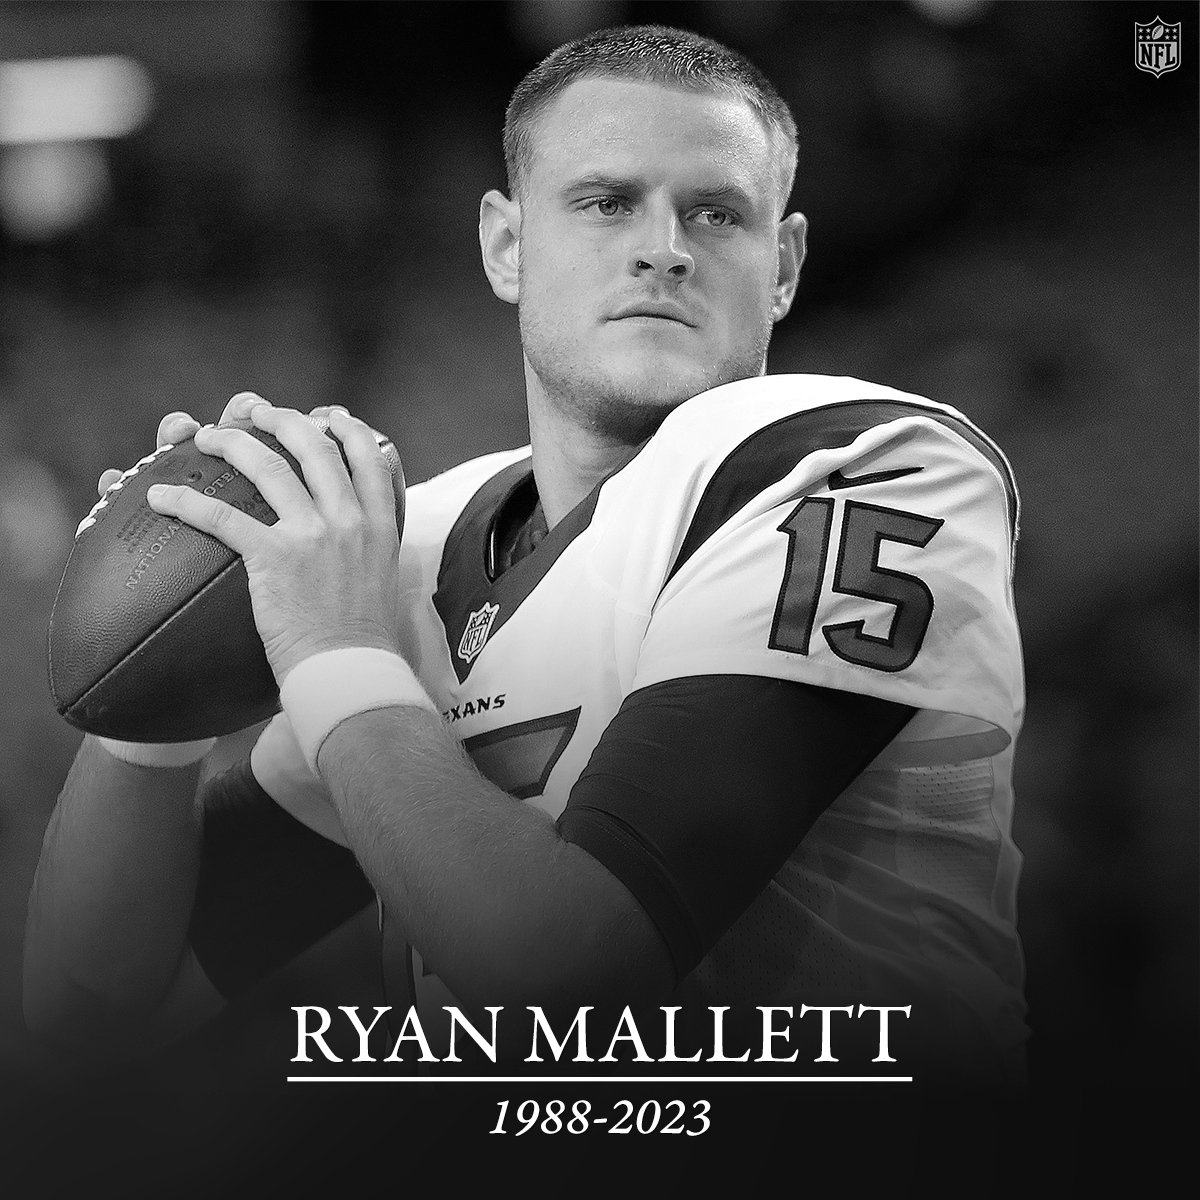 The NFL family is deeply saddened by the passing of Ryan Mallett. Our thoughts are with his family and loved ones.